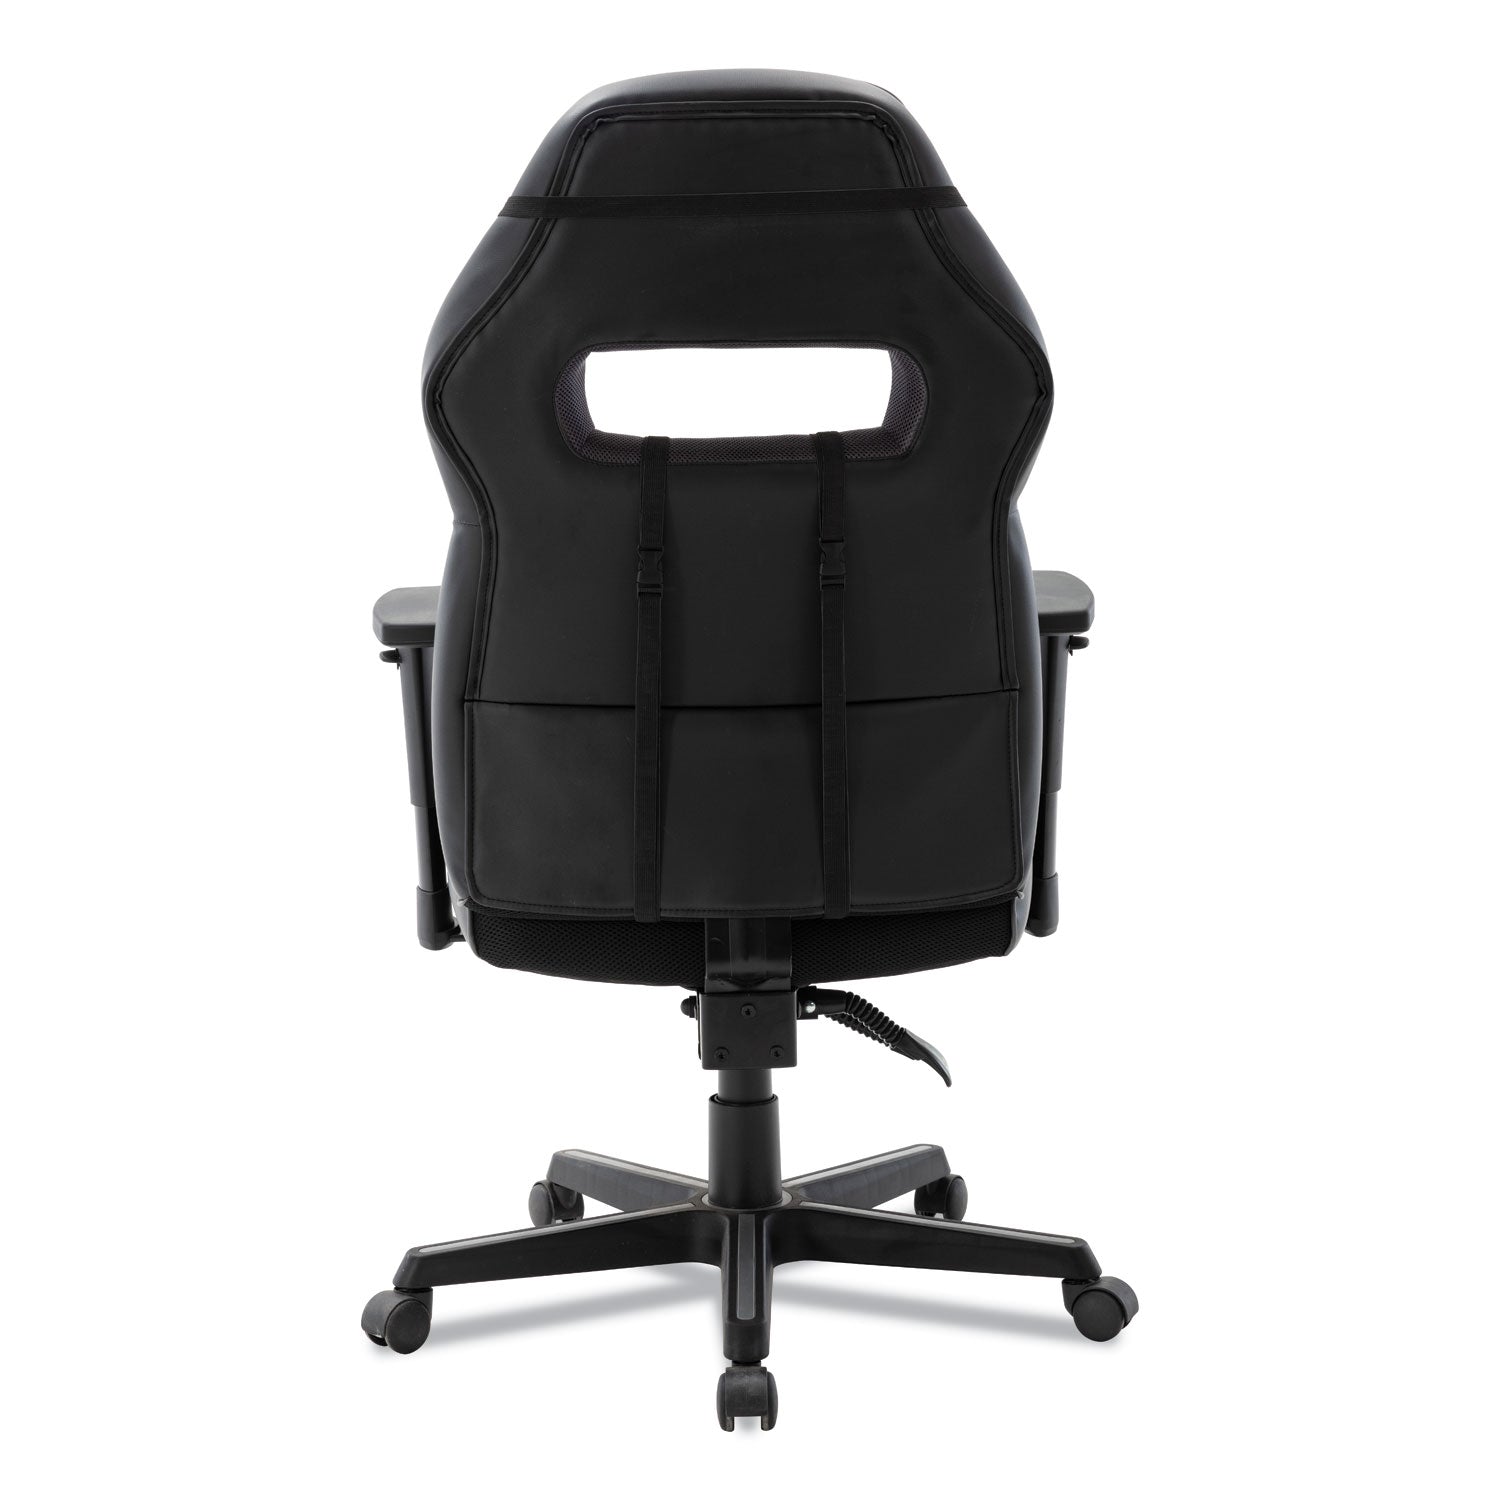 racing-style-ergonomic-gaming-chair-supports-275-lb-1591-to-198-seat-height-black-gray-trim-seat-back-black-gray-base_alegm4146 - 7